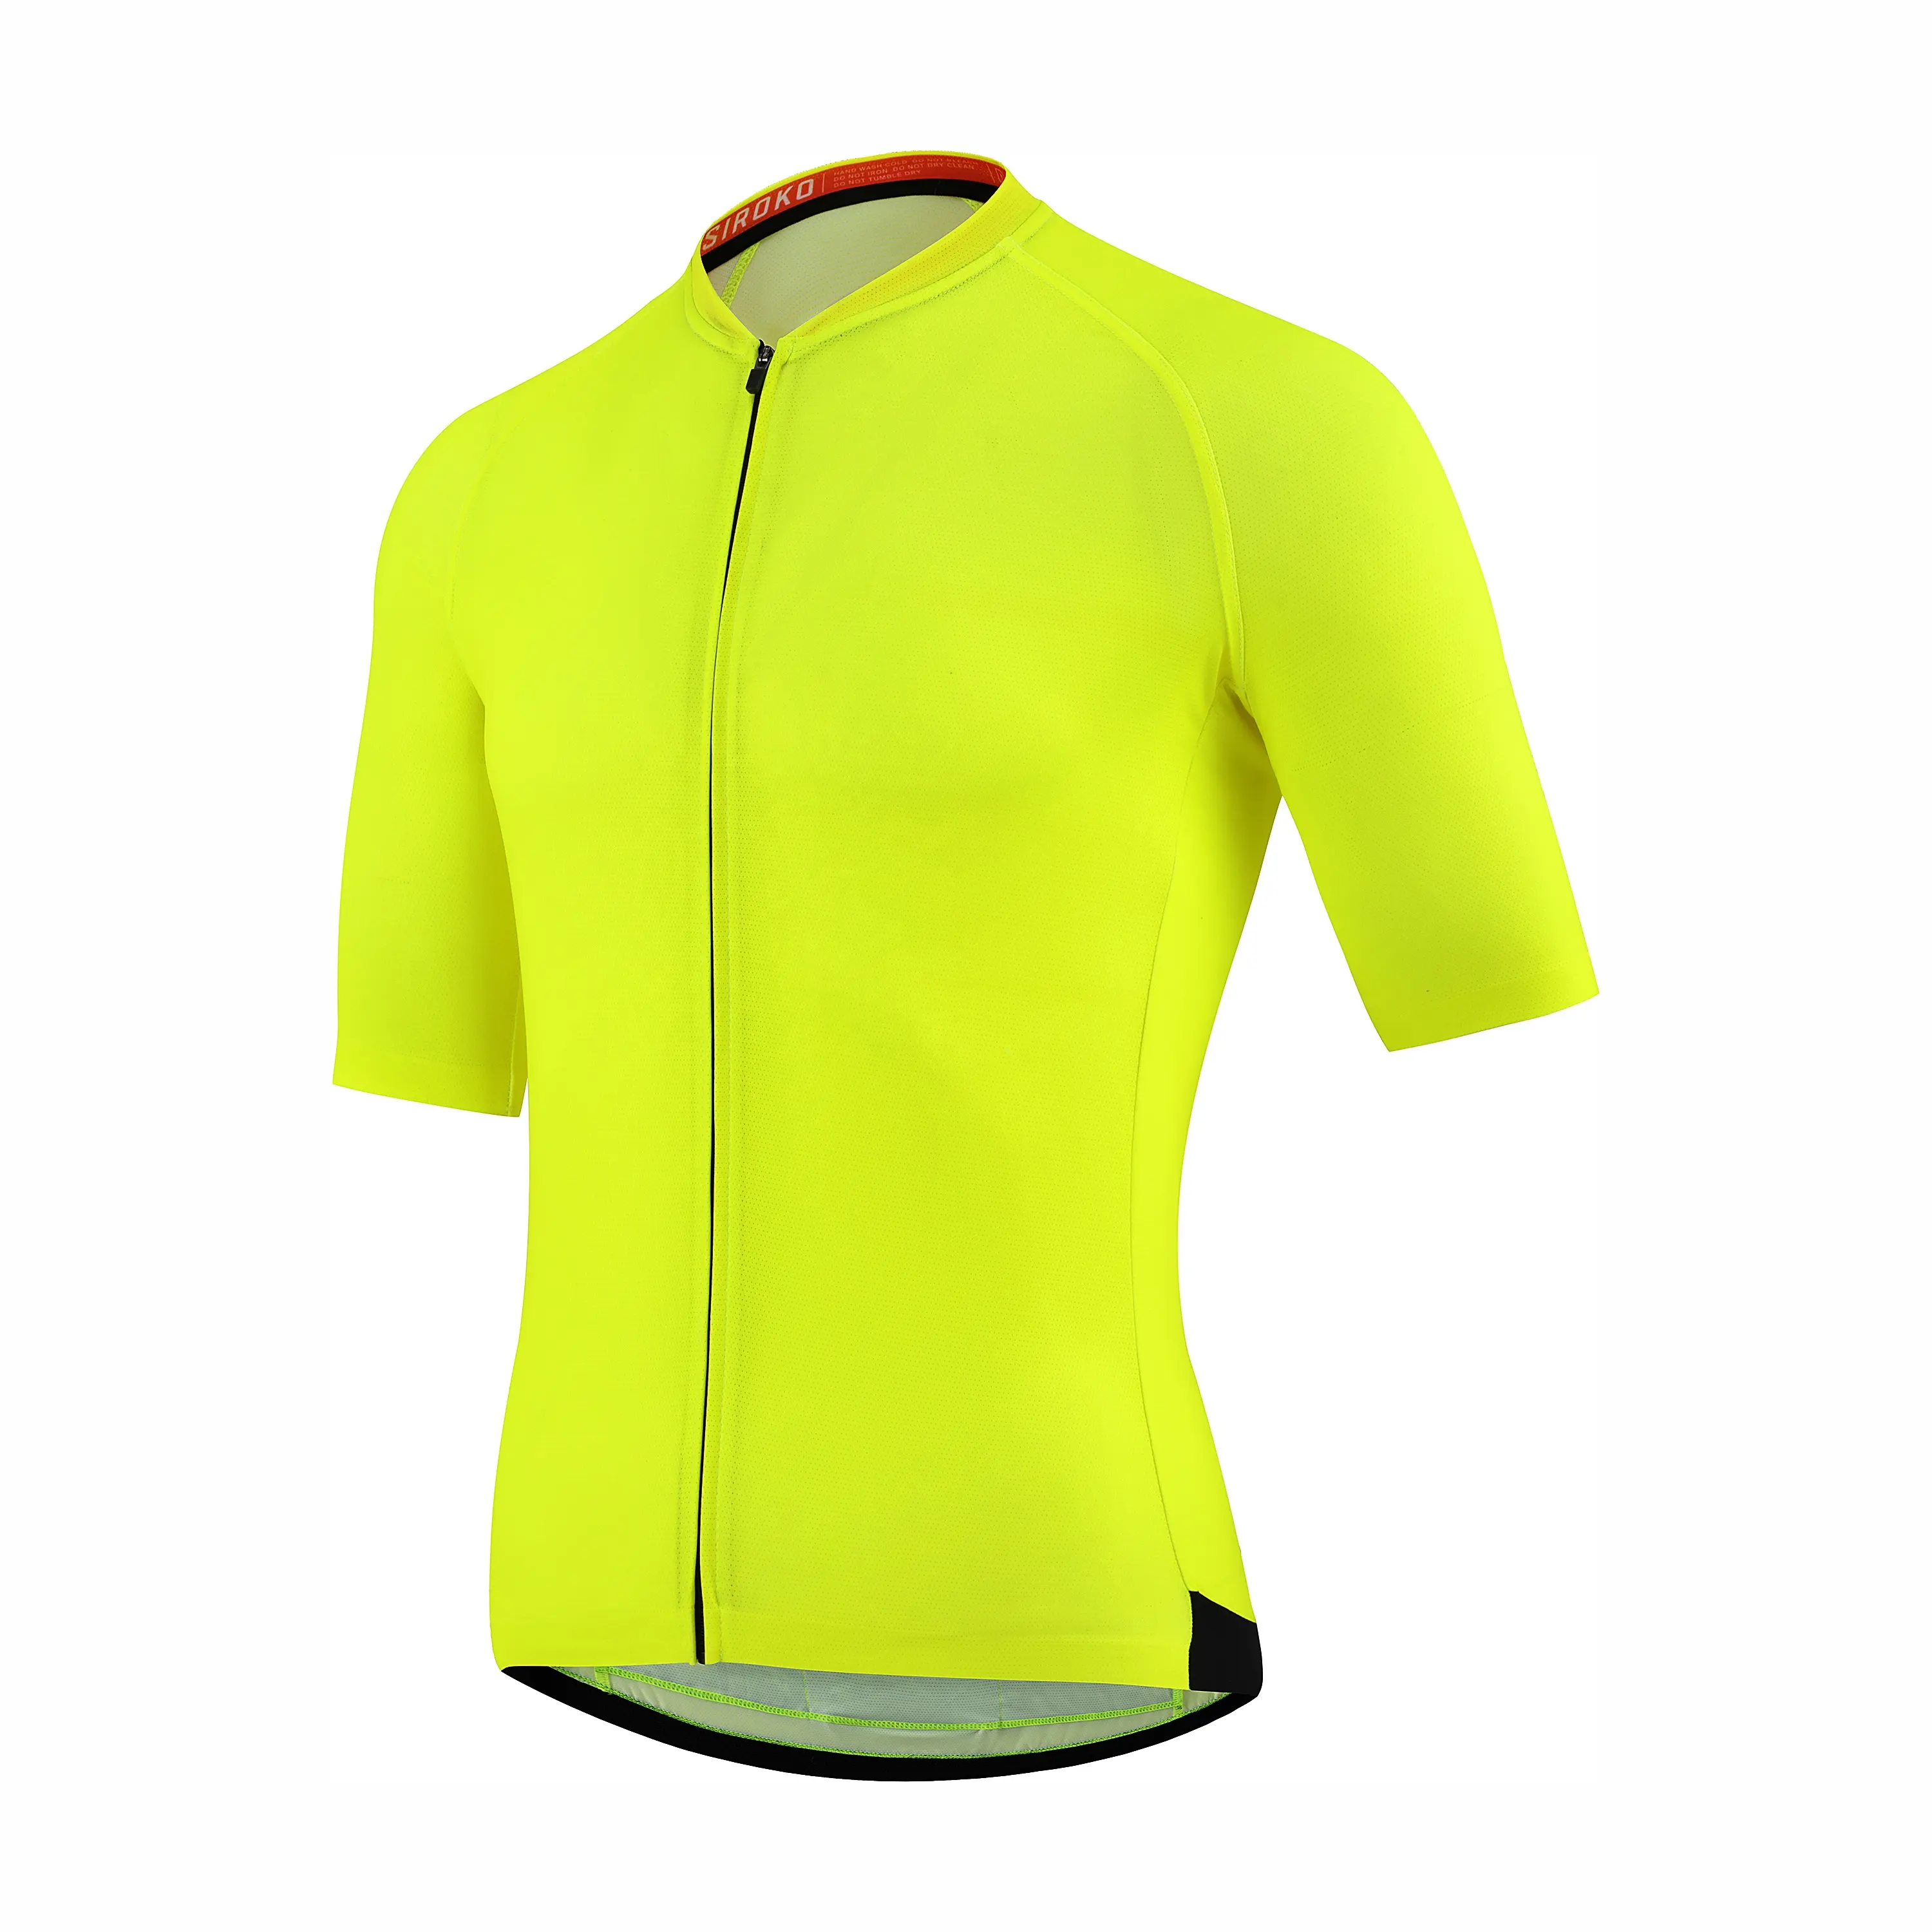 New High Quality Men Cycling Wear Bicycle Clothes Summer Breathable Quick Dry Custom Cycling Jersey Bibshort Set